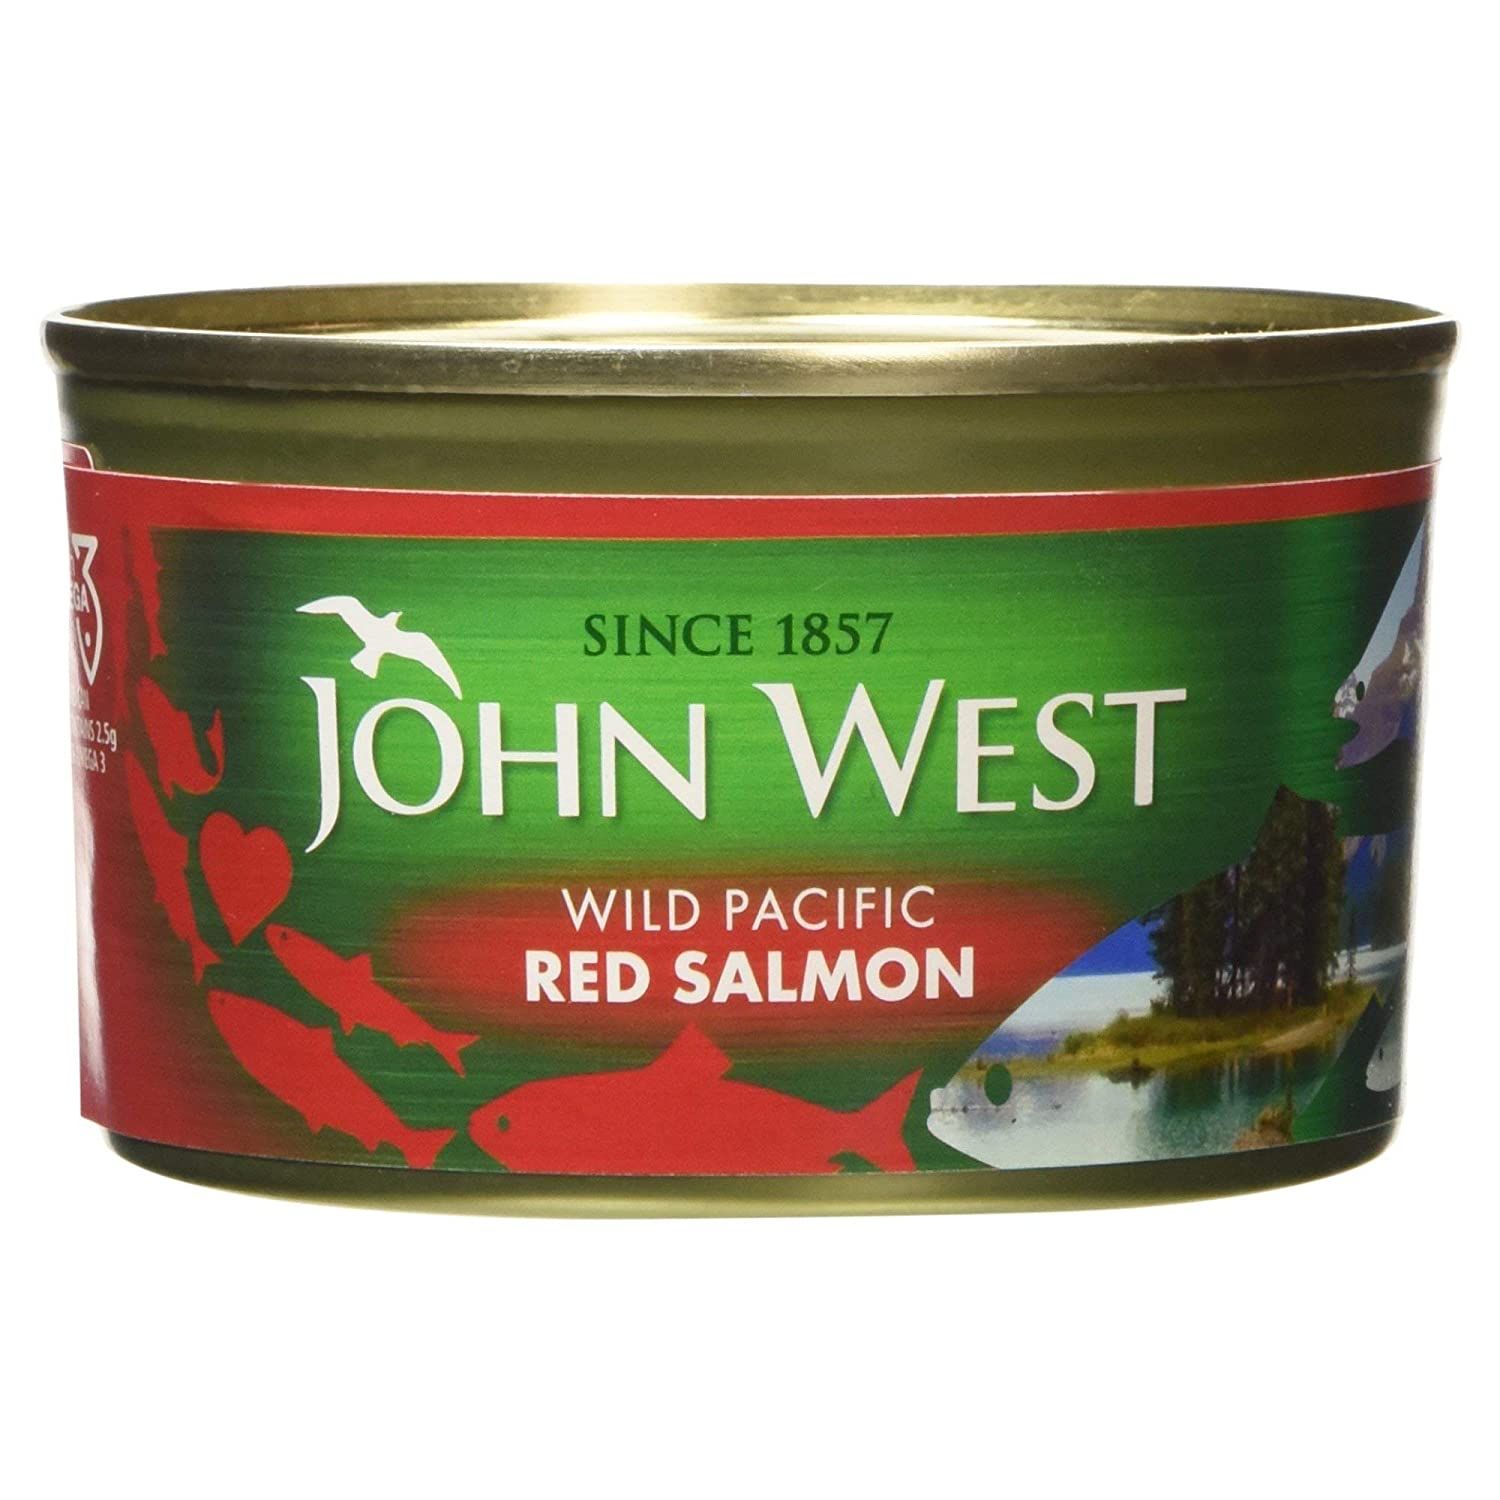 John West Wild Pacific Red Salmon Image